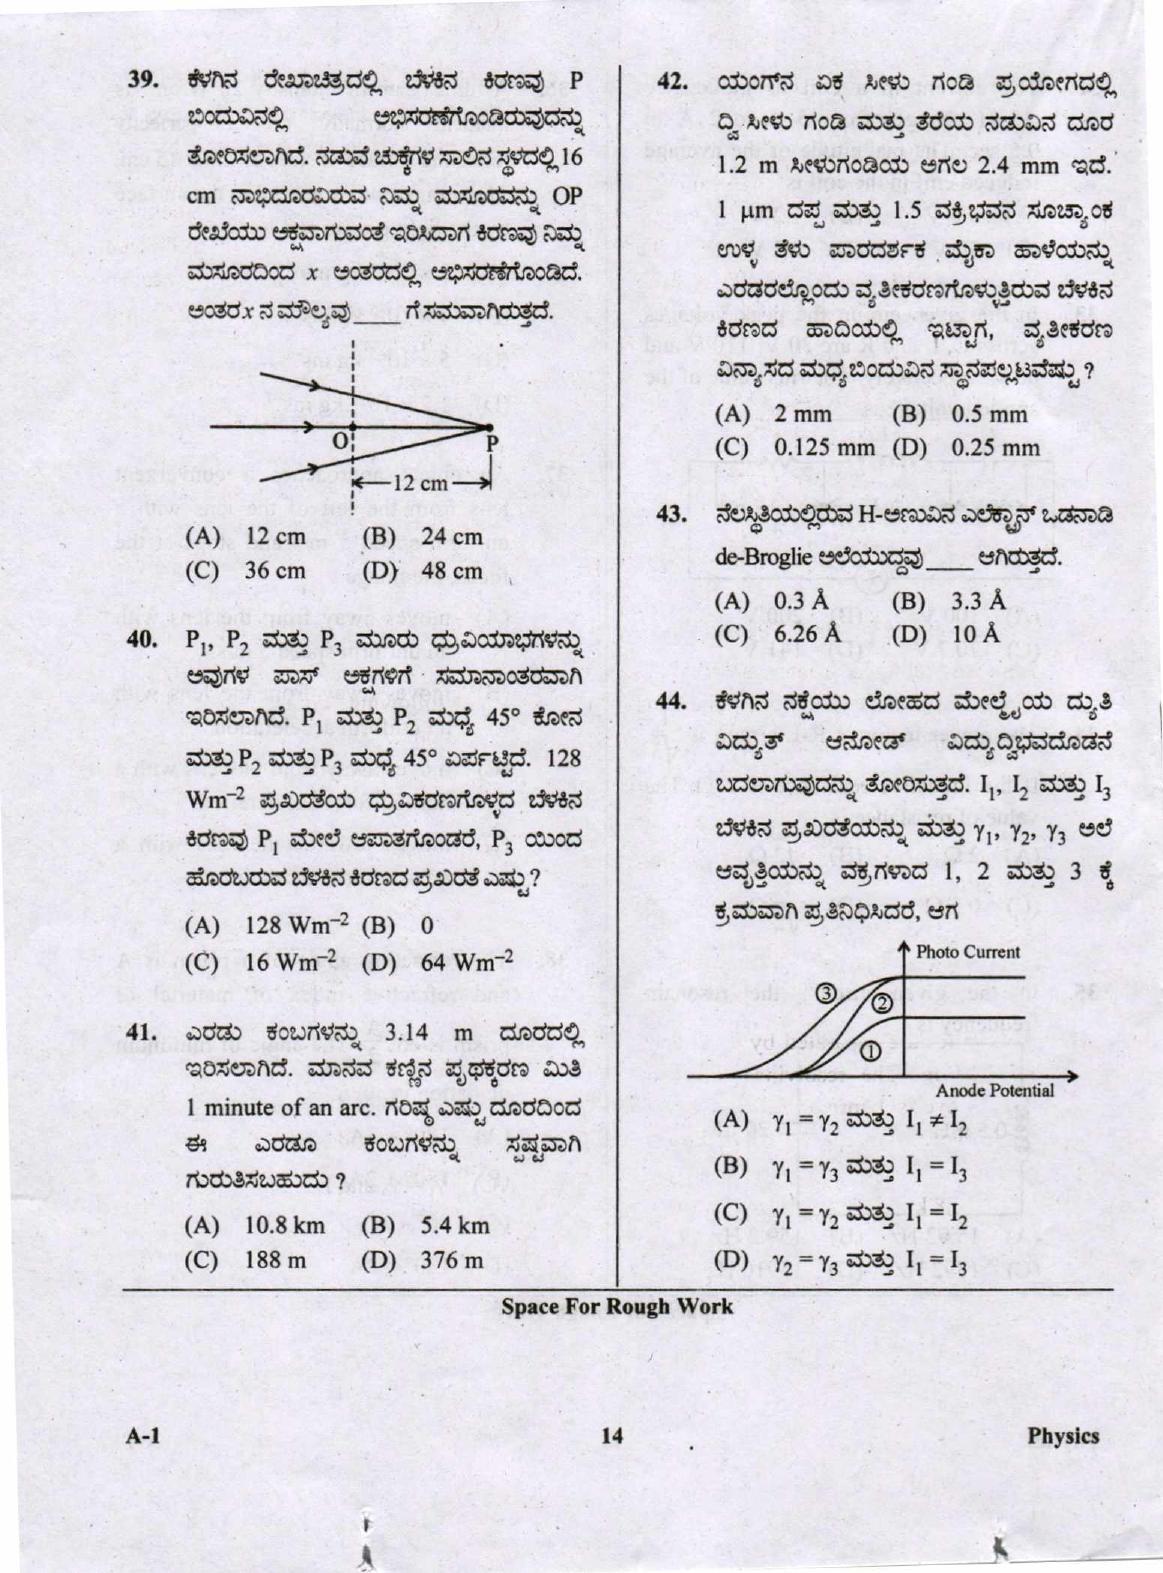 KCET Physics 2020 Question Papers - Page 14